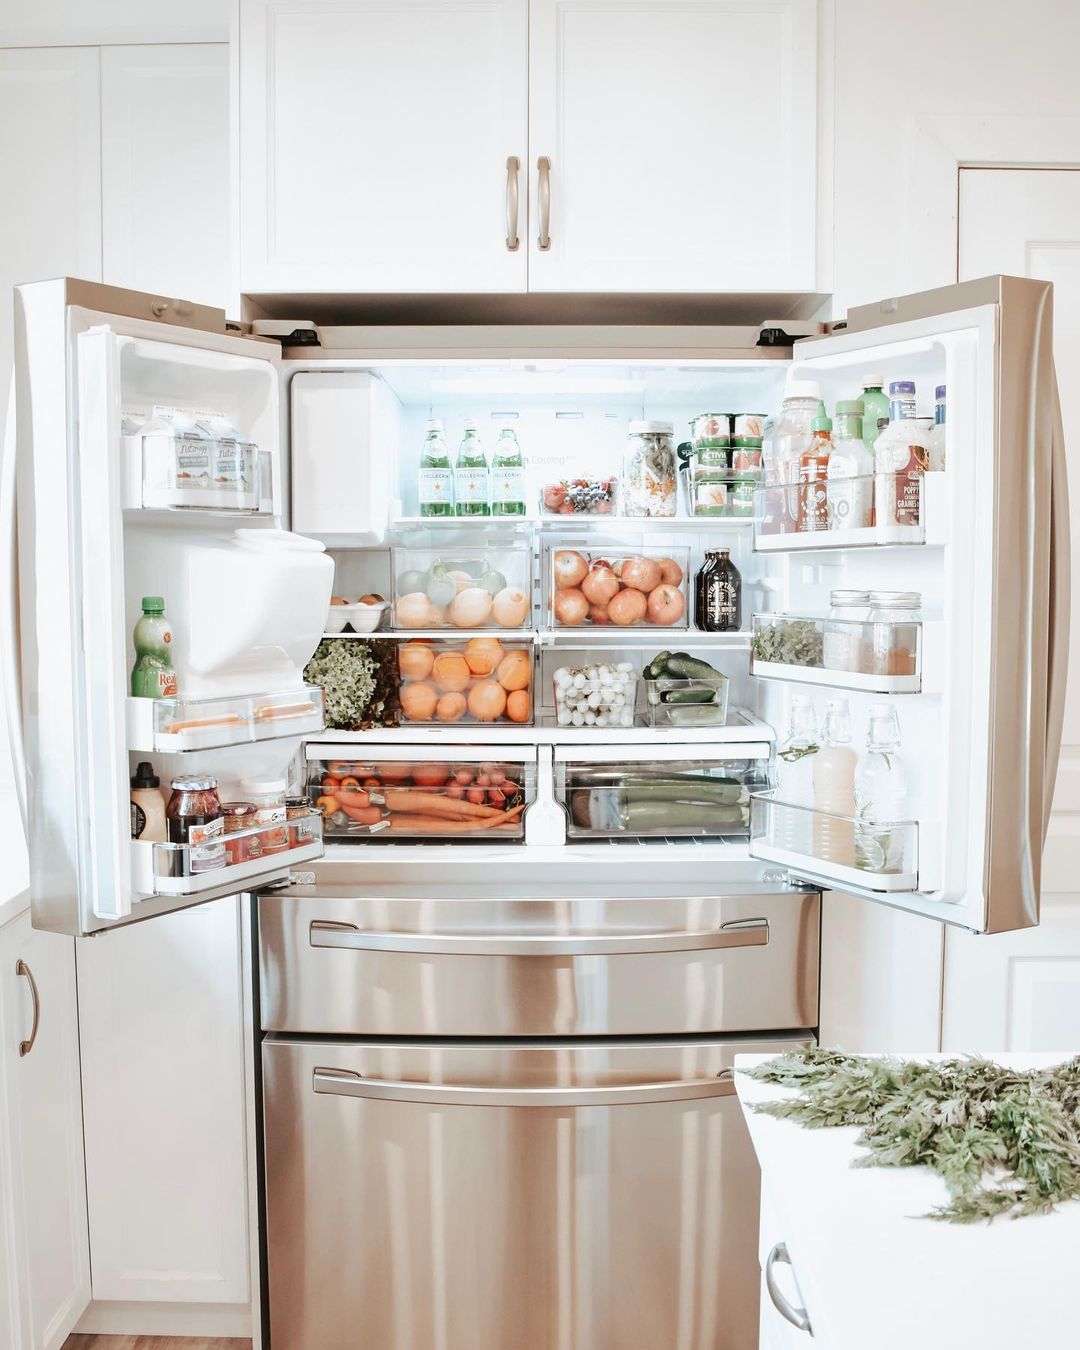 Samsung Energy Efficient Refrigerator with Doors Open. Photo by Instagram user @simplychristylynn